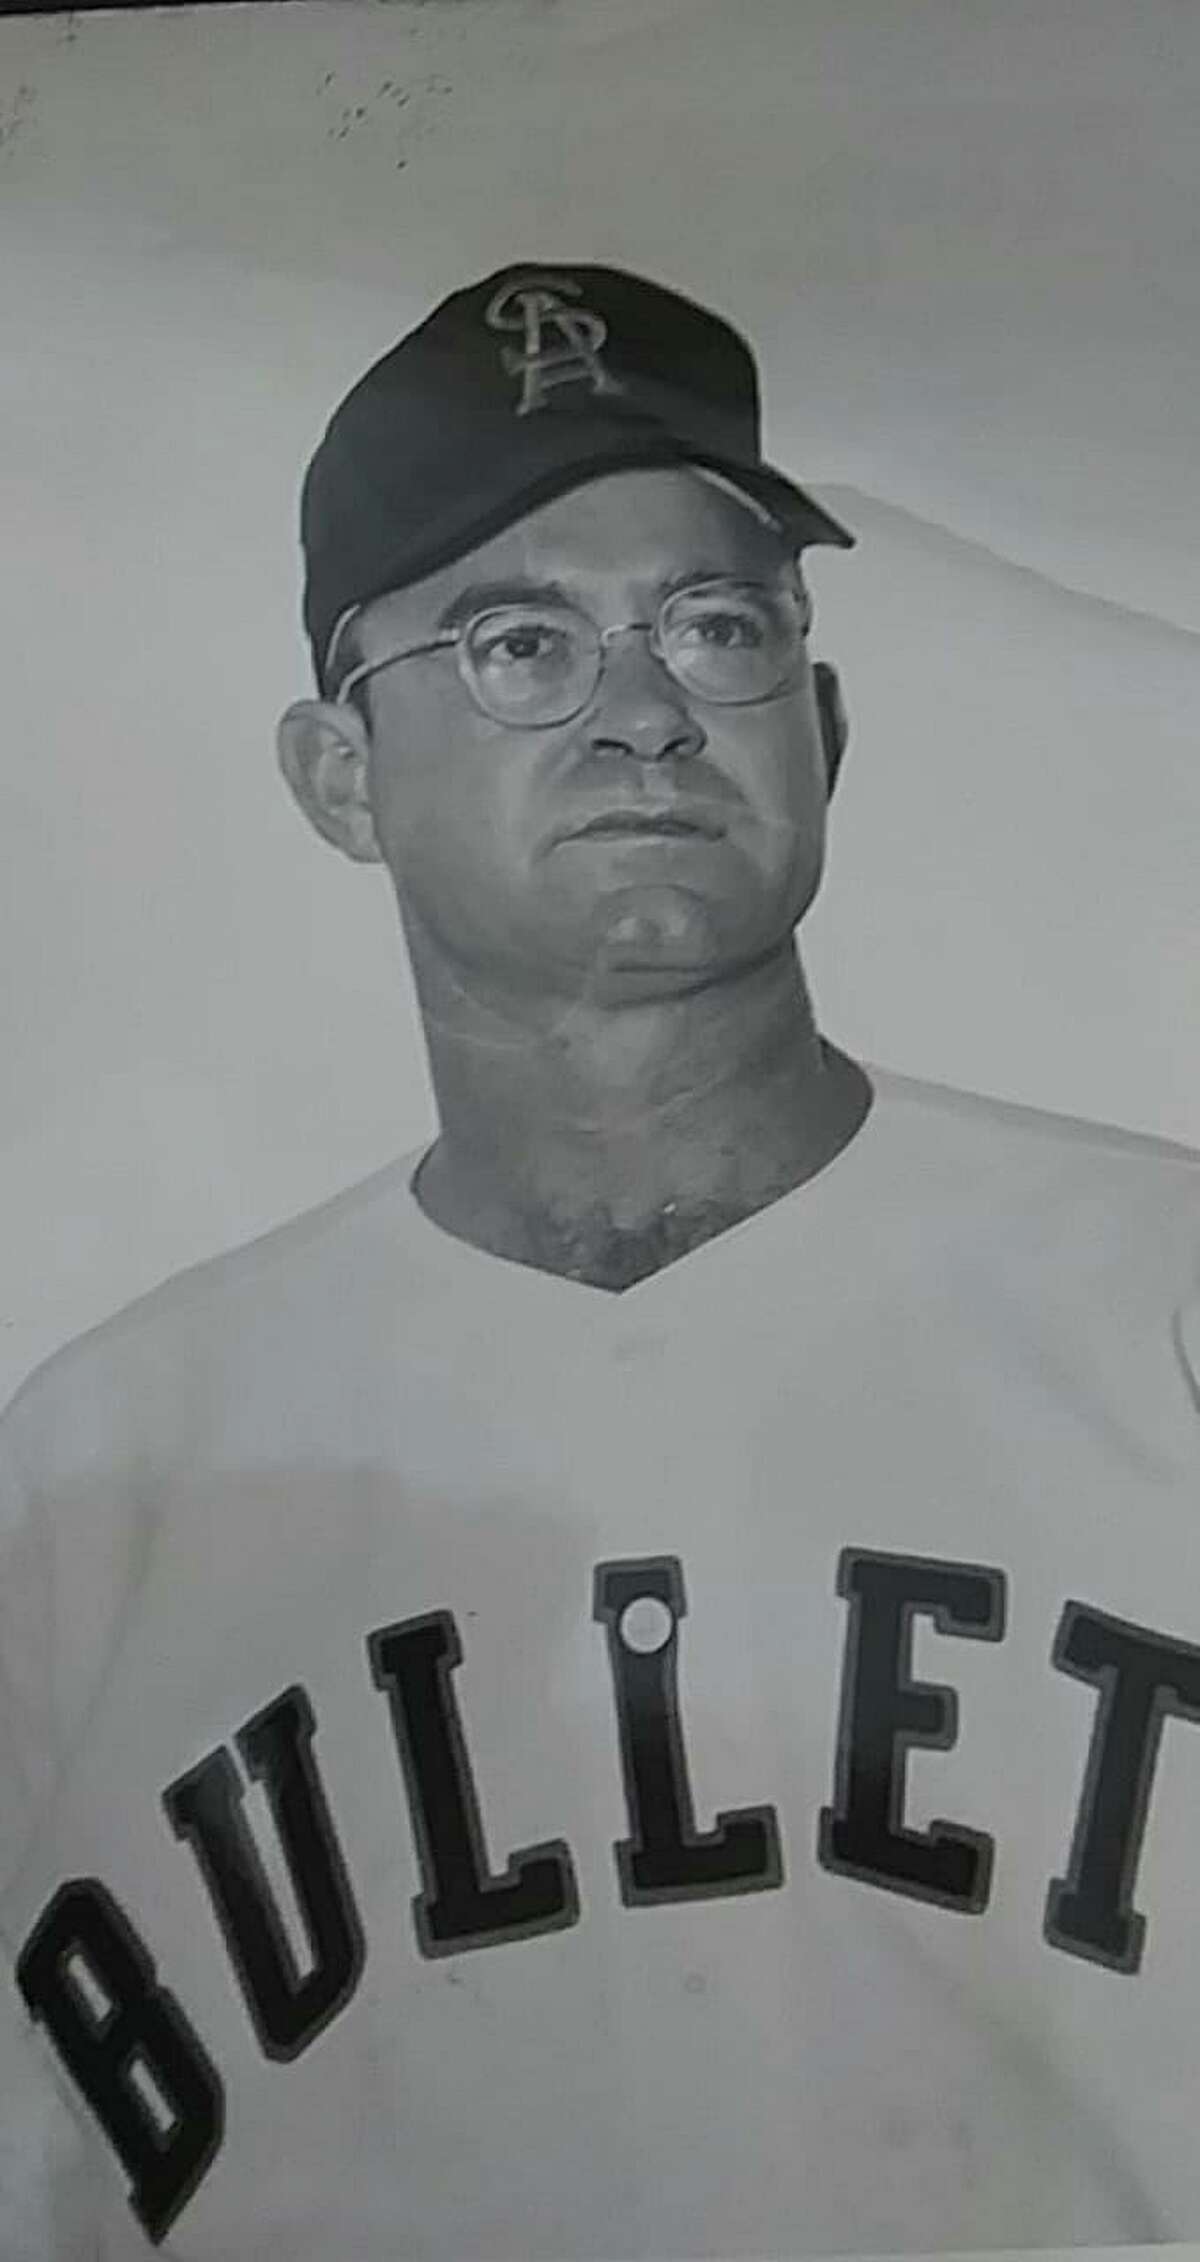 Clint Courtney, shown here with the San Antonio Bullets, was a former member of the New York Yankees, who played for the San Antonio minor-league affiliate for their only two seasons, 1962 and 1963